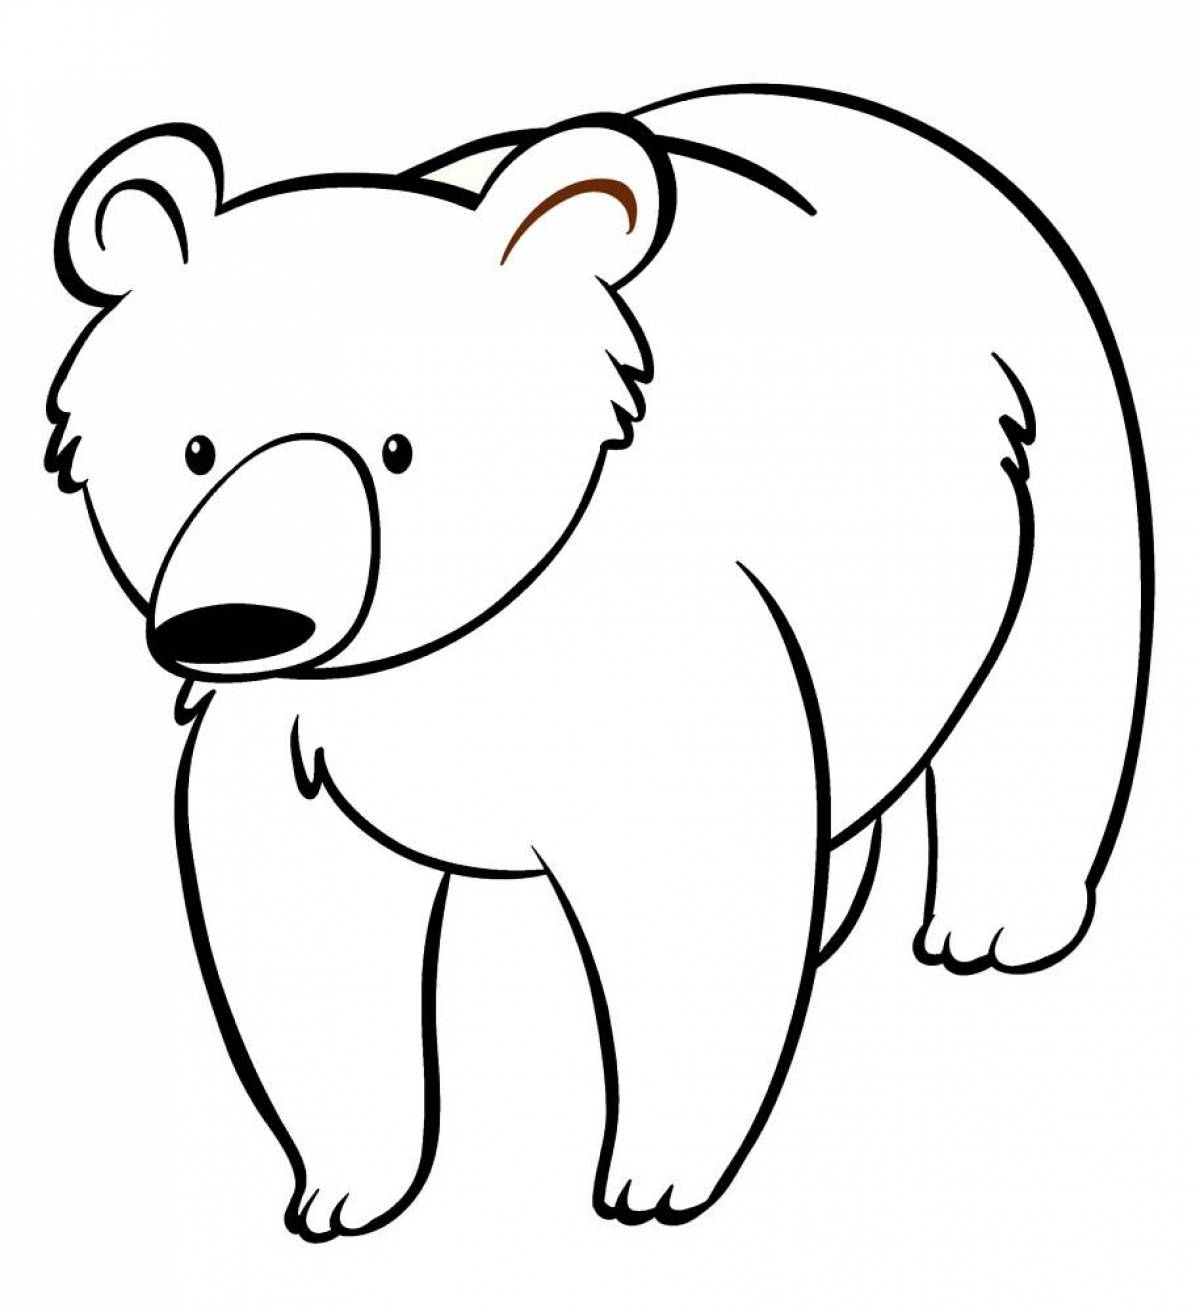 Coloring book fluffy bear for kids